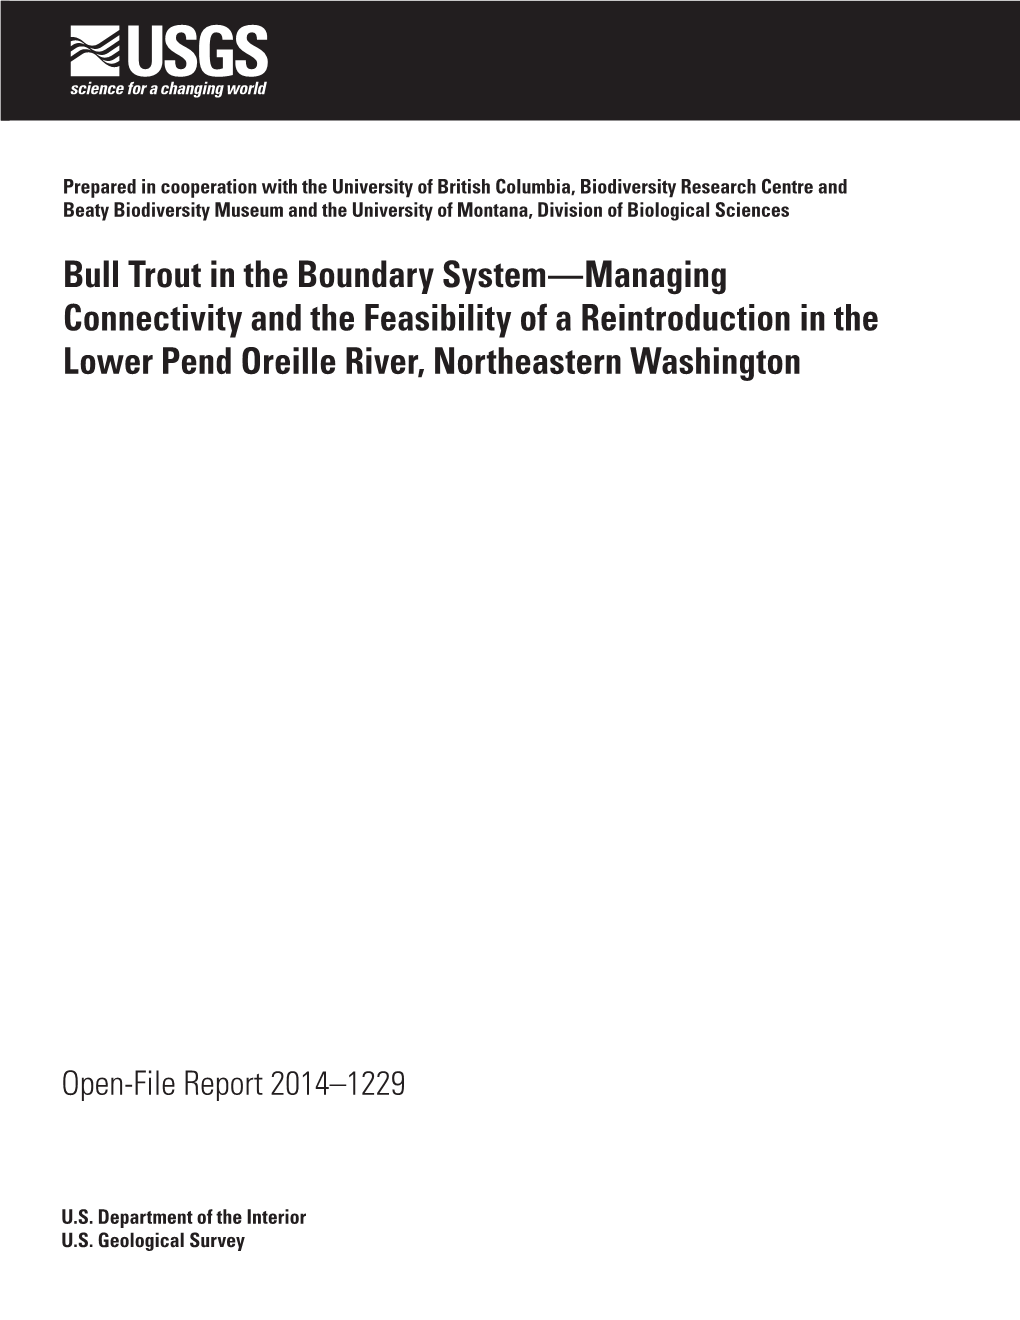 Bull Trout in the Boundary System—Managing Connectivity and the Feasibility of a Reintroduction in the Lower Pend Oreille River, Northeastern Washington